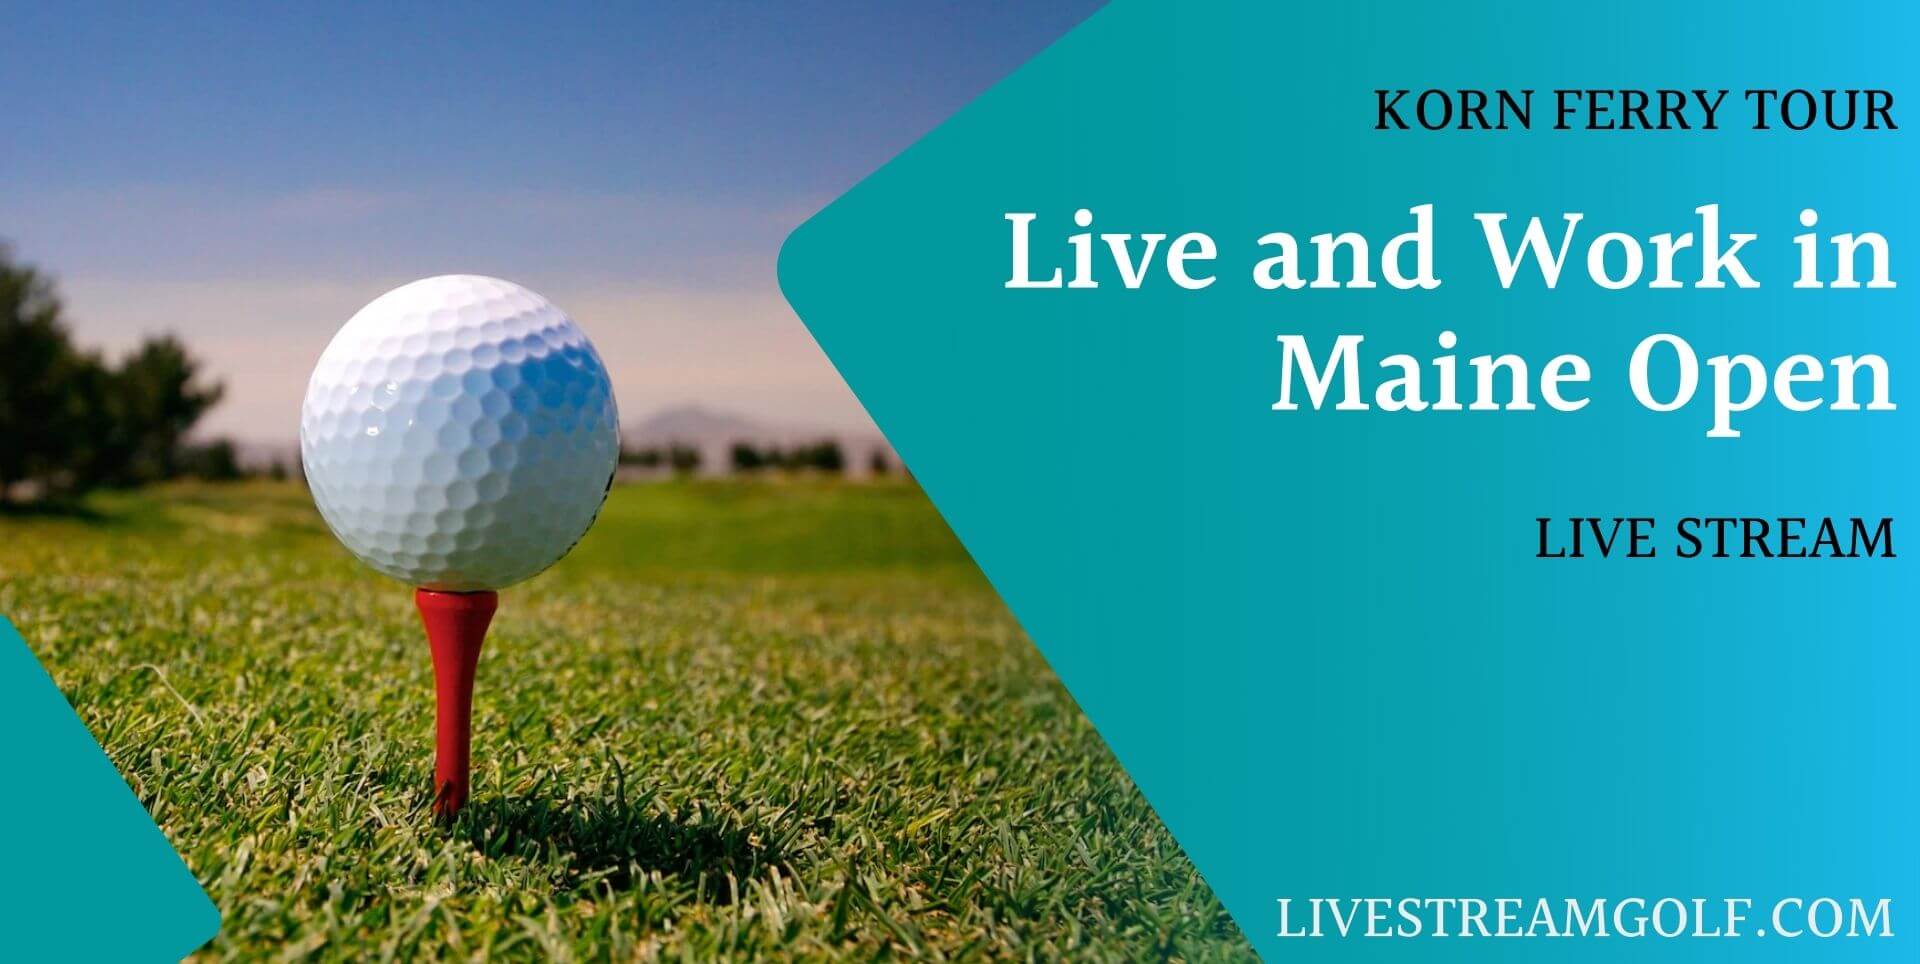 Live And Work In Maine Open Day 2 Live Stream: Korn Ferry 2022